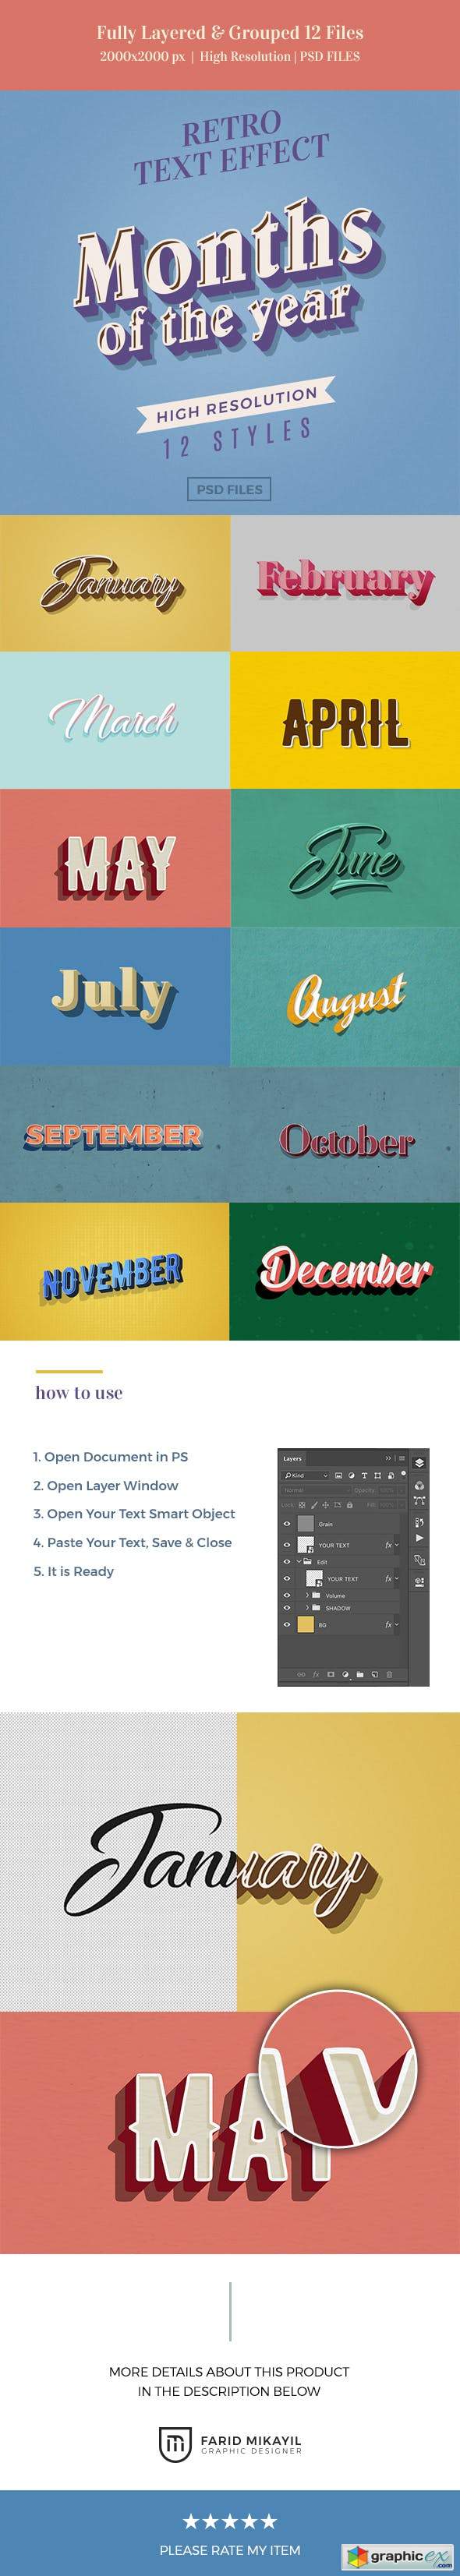 Months of the Year Retro Text Effects